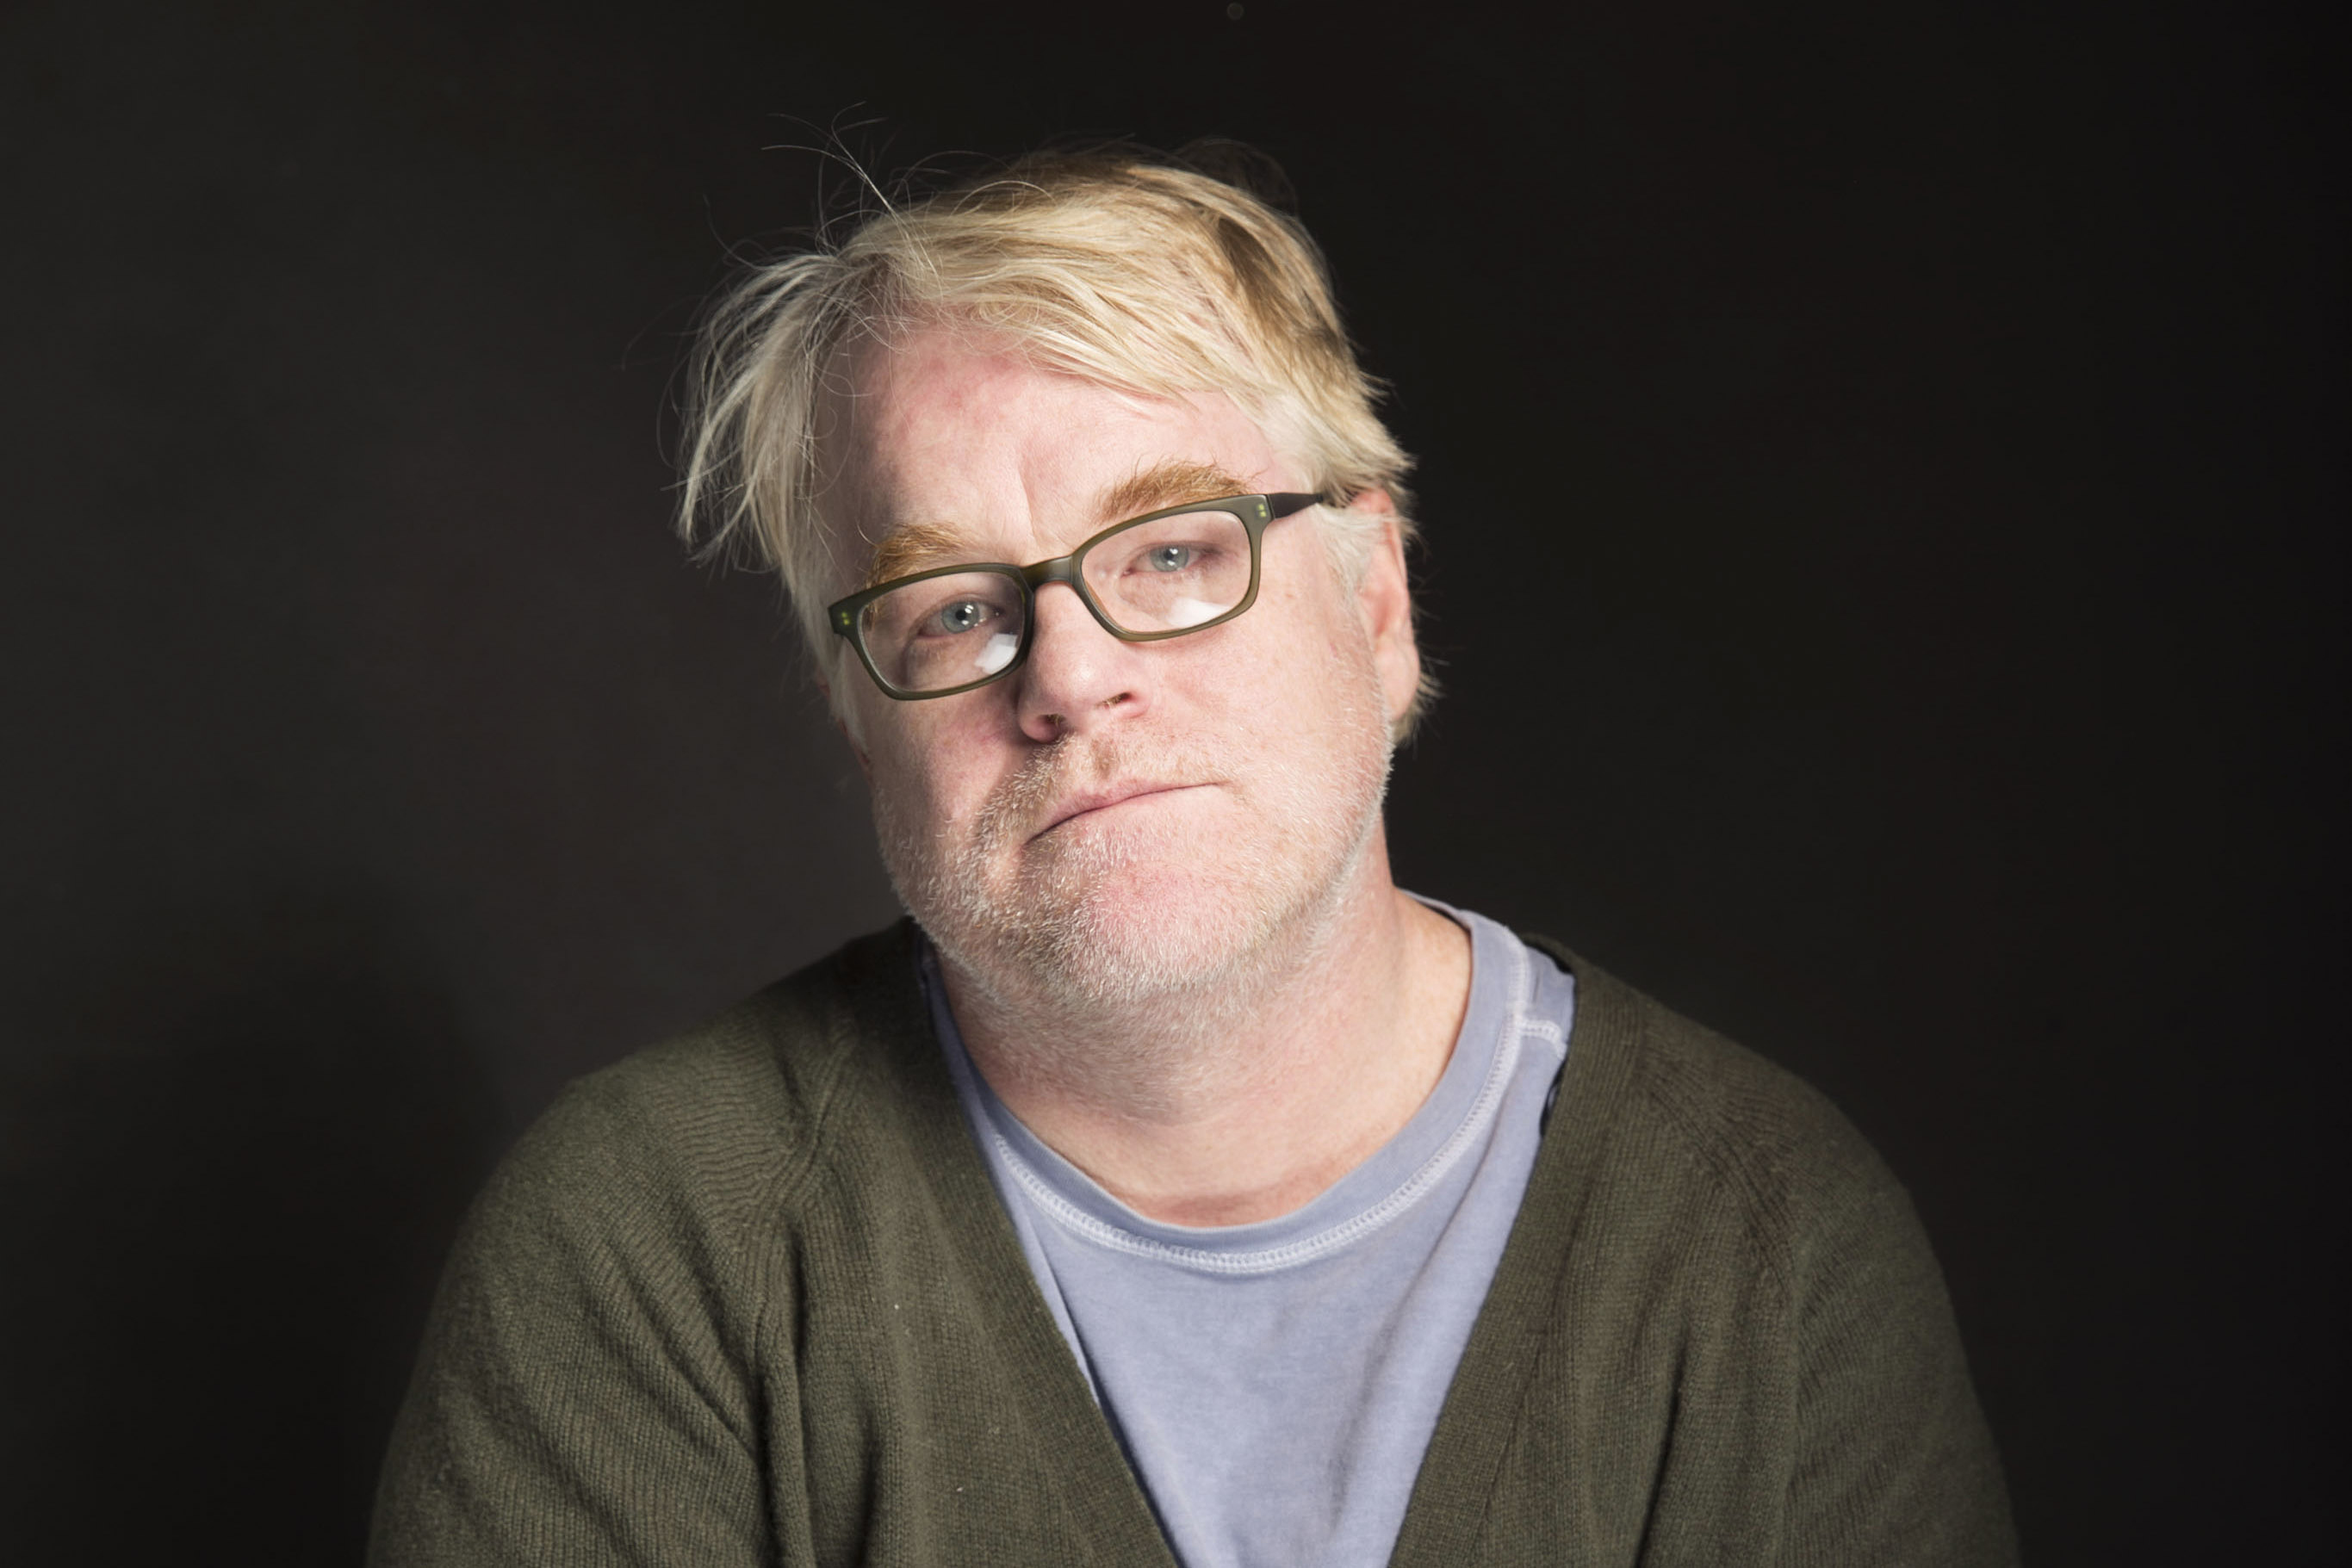 In this Jan. 19, 2014 file photo, Philip Seymour Hoffman poses for a portrait at The Collective and Gibson Lounge Powered by CEG, during the Sundance Film Festival, in Park City, Utah. (Victoria Will / Invision / AP)